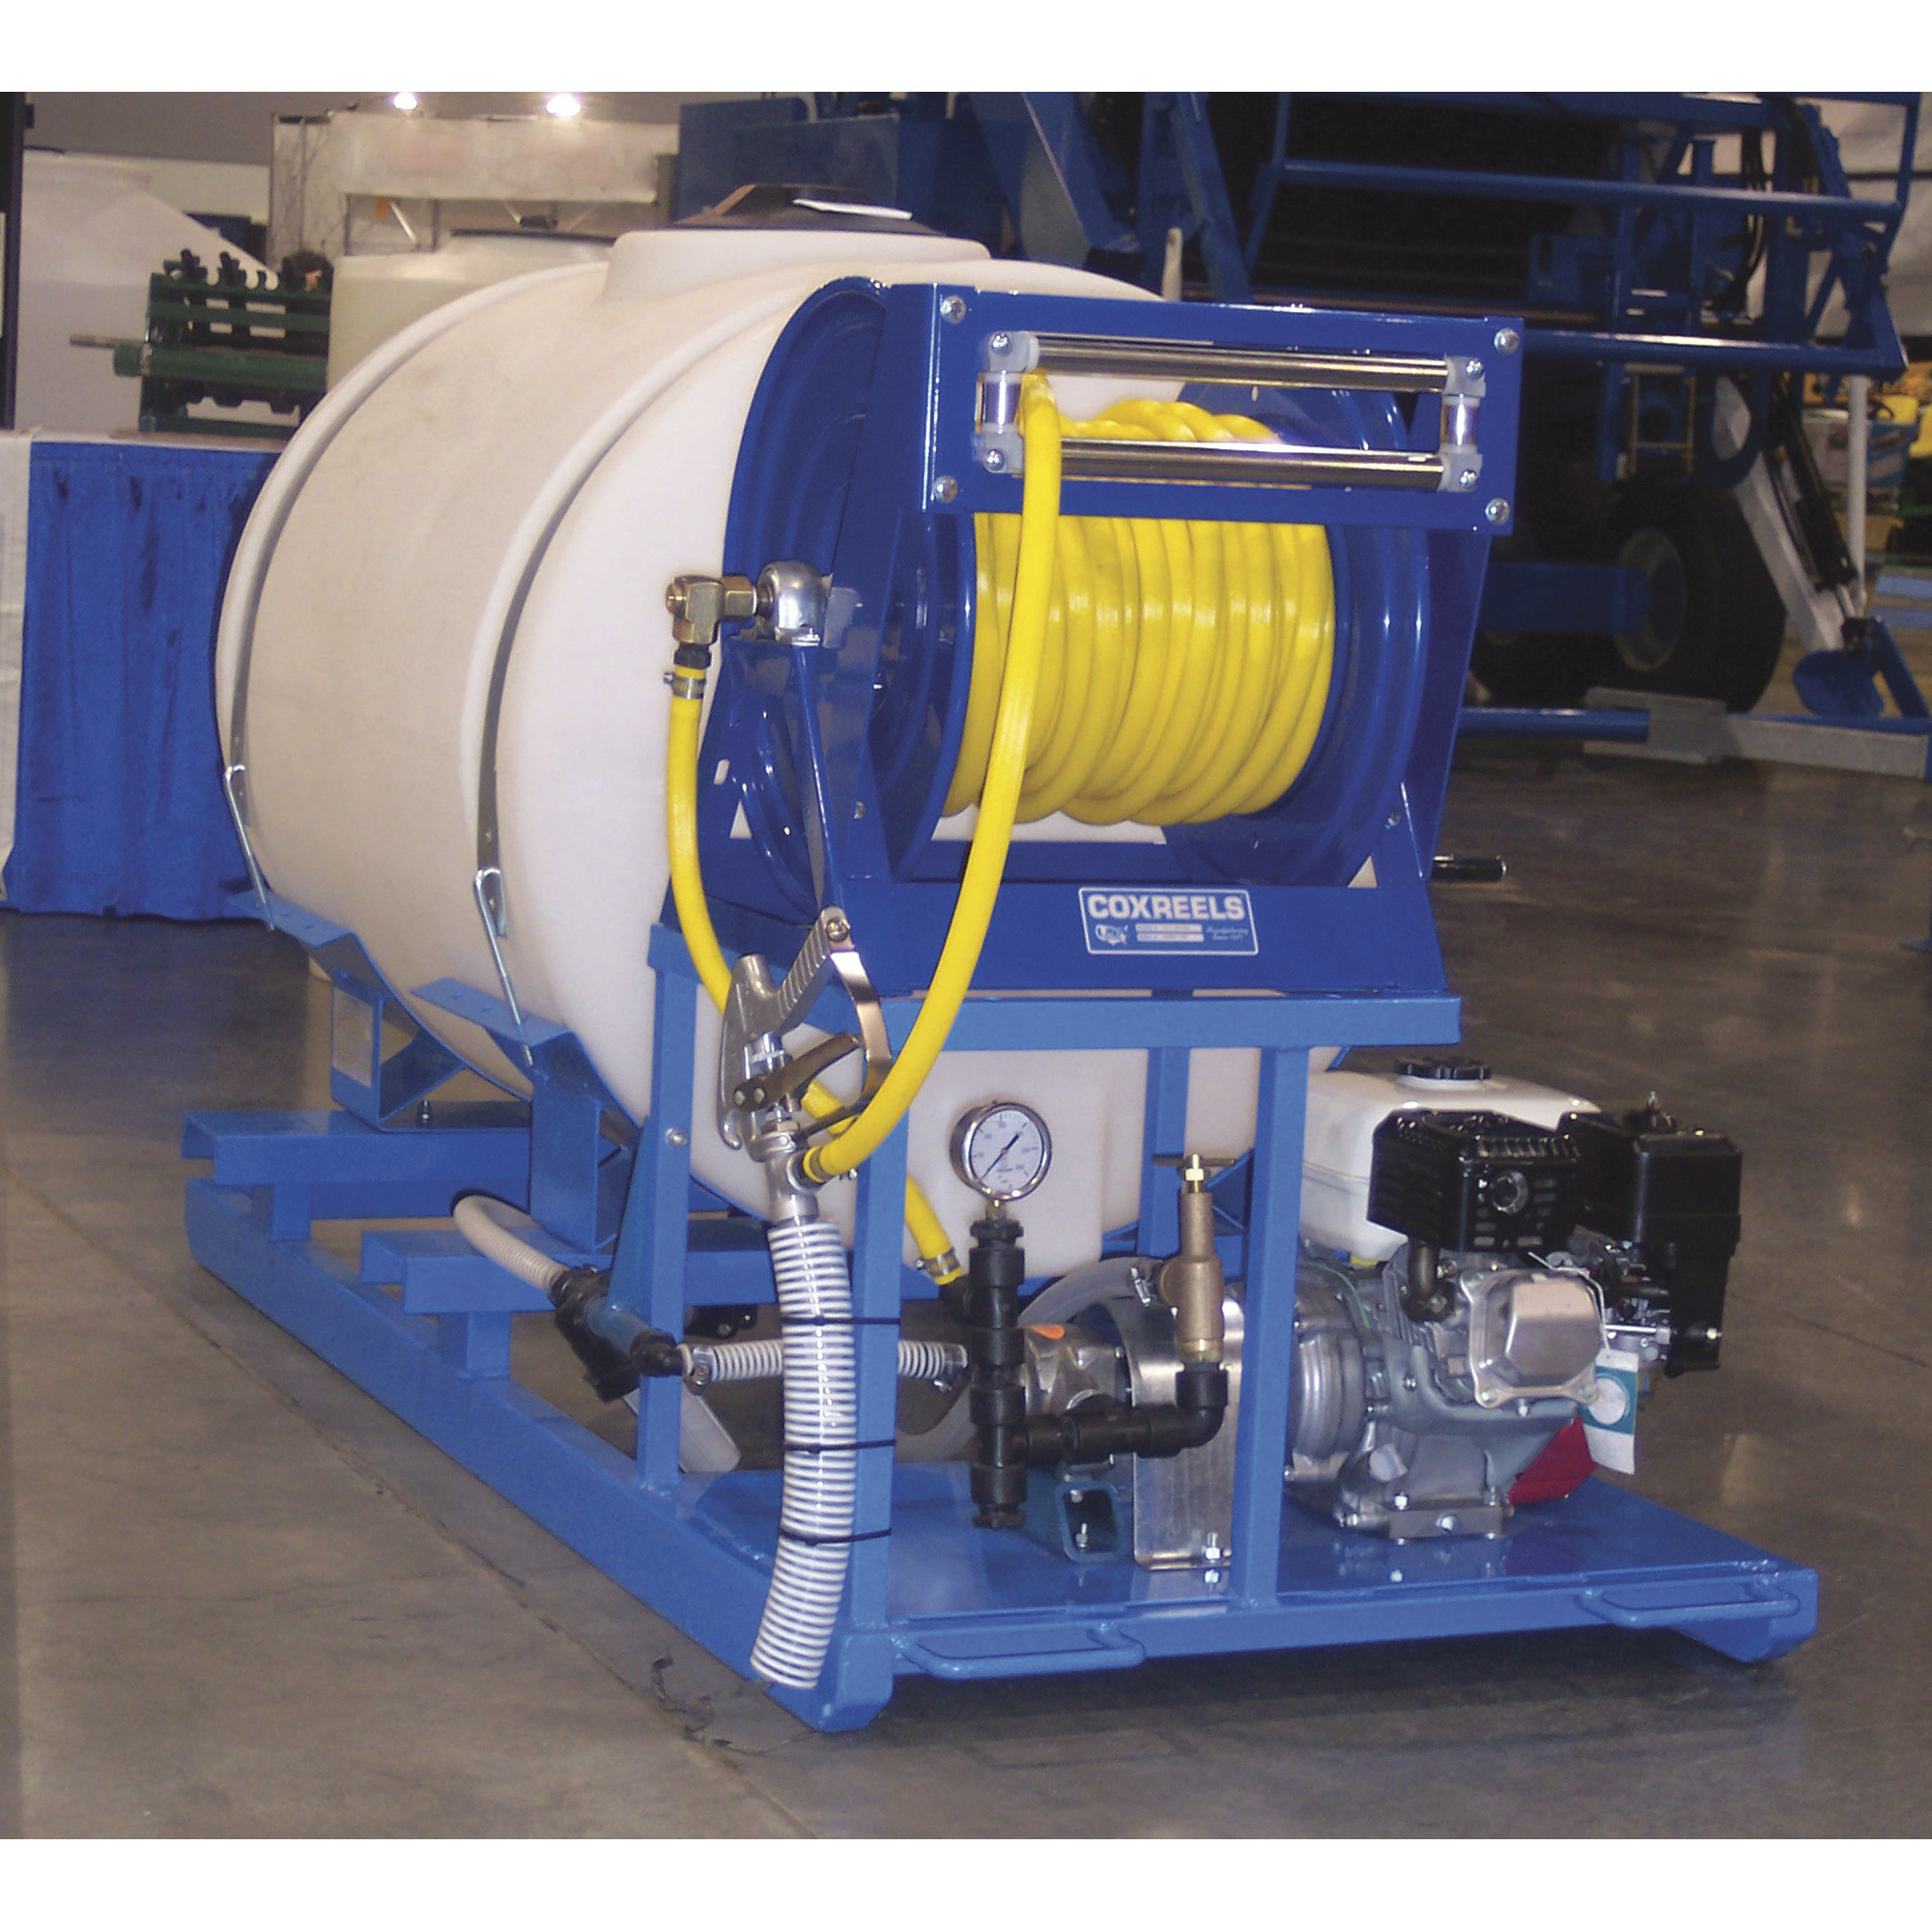 Hose Reels  Coxreels for sale from Airdraulics - IndustrySearch Australia